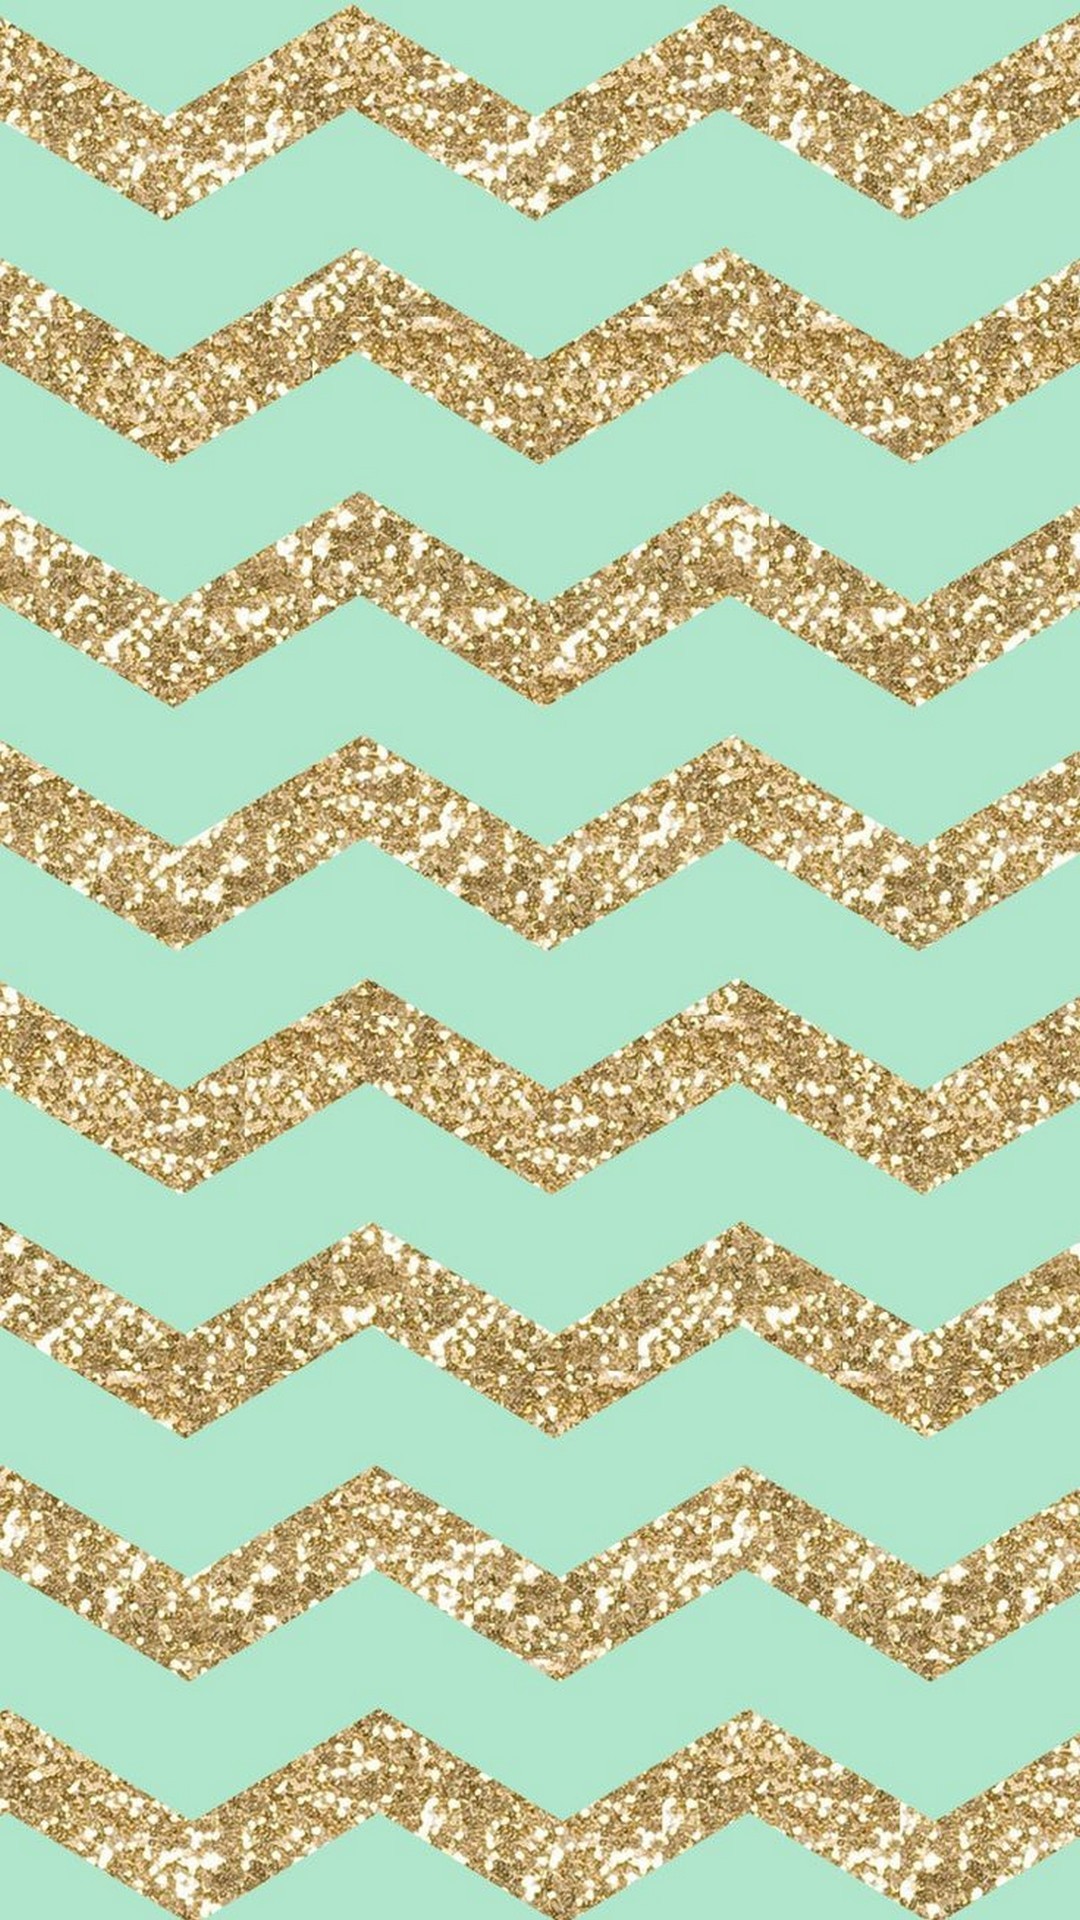 Girly Wallpaper For Android with high-resolution 1080x1920 pixel. You can use this wallpaper for your Android backgrounds, Tablet, Samsung Screensavers, Mobile Phone Lock Screen and another Smartphones device